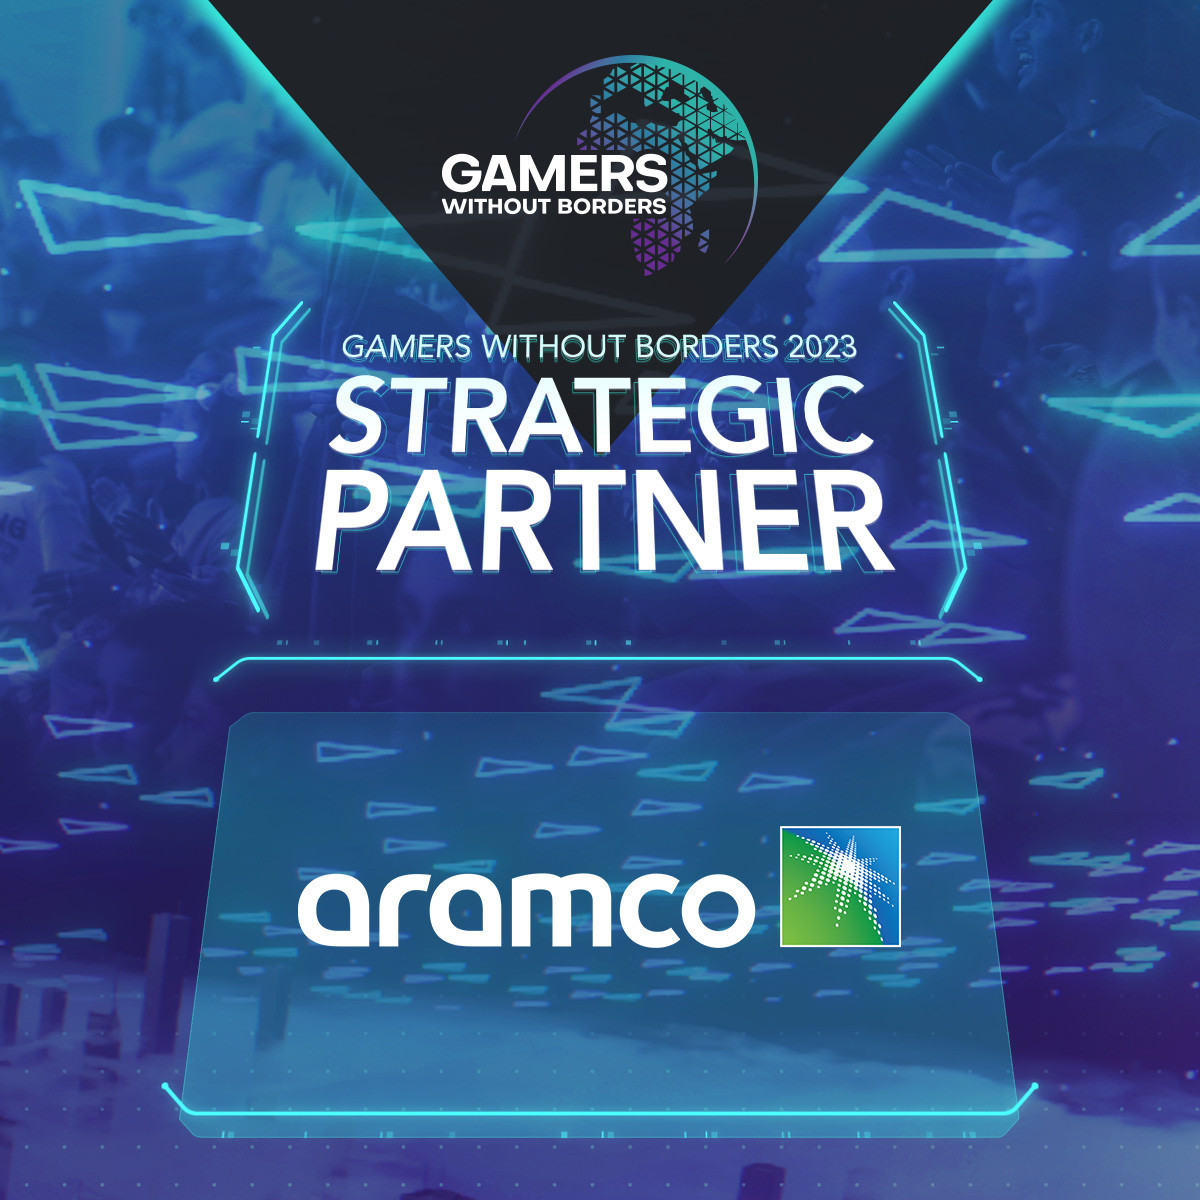 Aramco renews partnership with Saudi Esports Federation for Games Without Borders